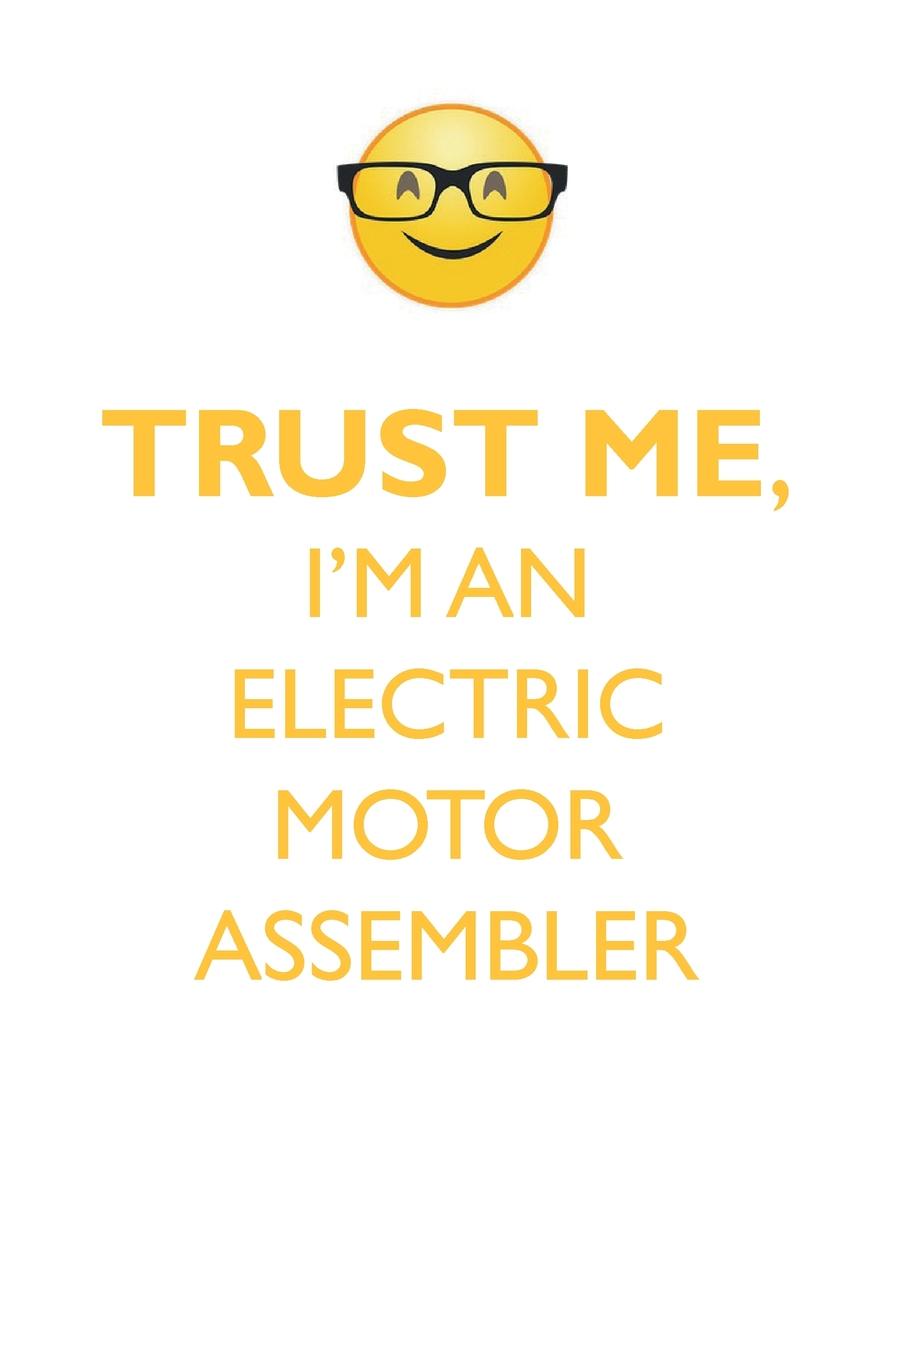 TRUST ME, I`M AN ELECTRIC MOTOR ASSEMBLER AFFIRMATIONS WORKBOOK Positive Affirmations Workbook. Includes. Mentoring Questions, Guidance, Supporting You.